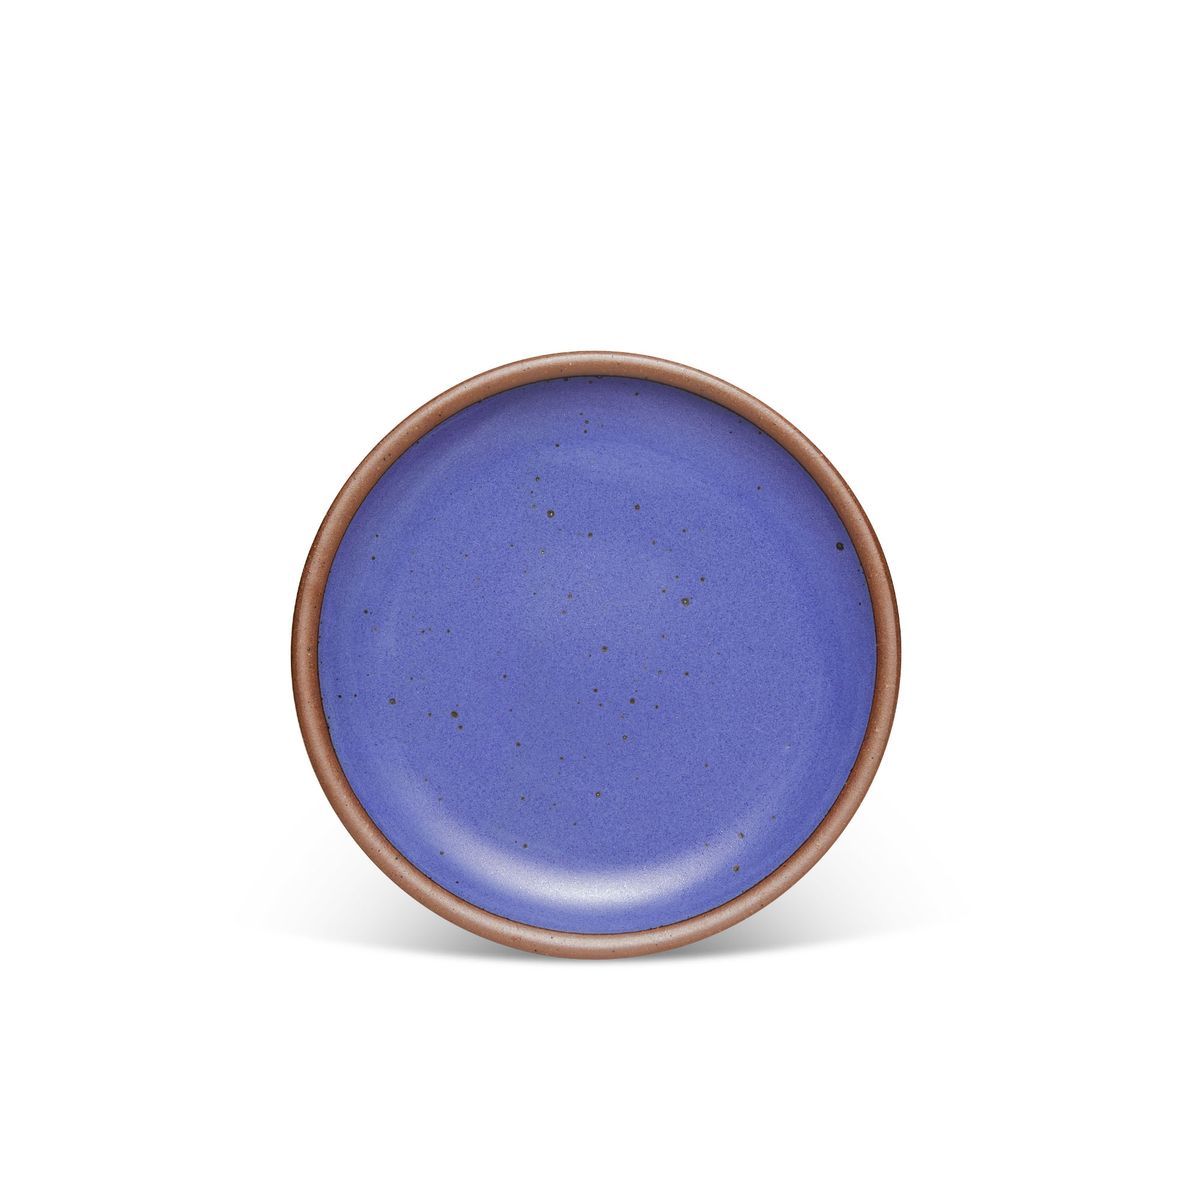 A medium sized ceramic plate in a true cool blue color featuring iron speckles and an unglazed rim.